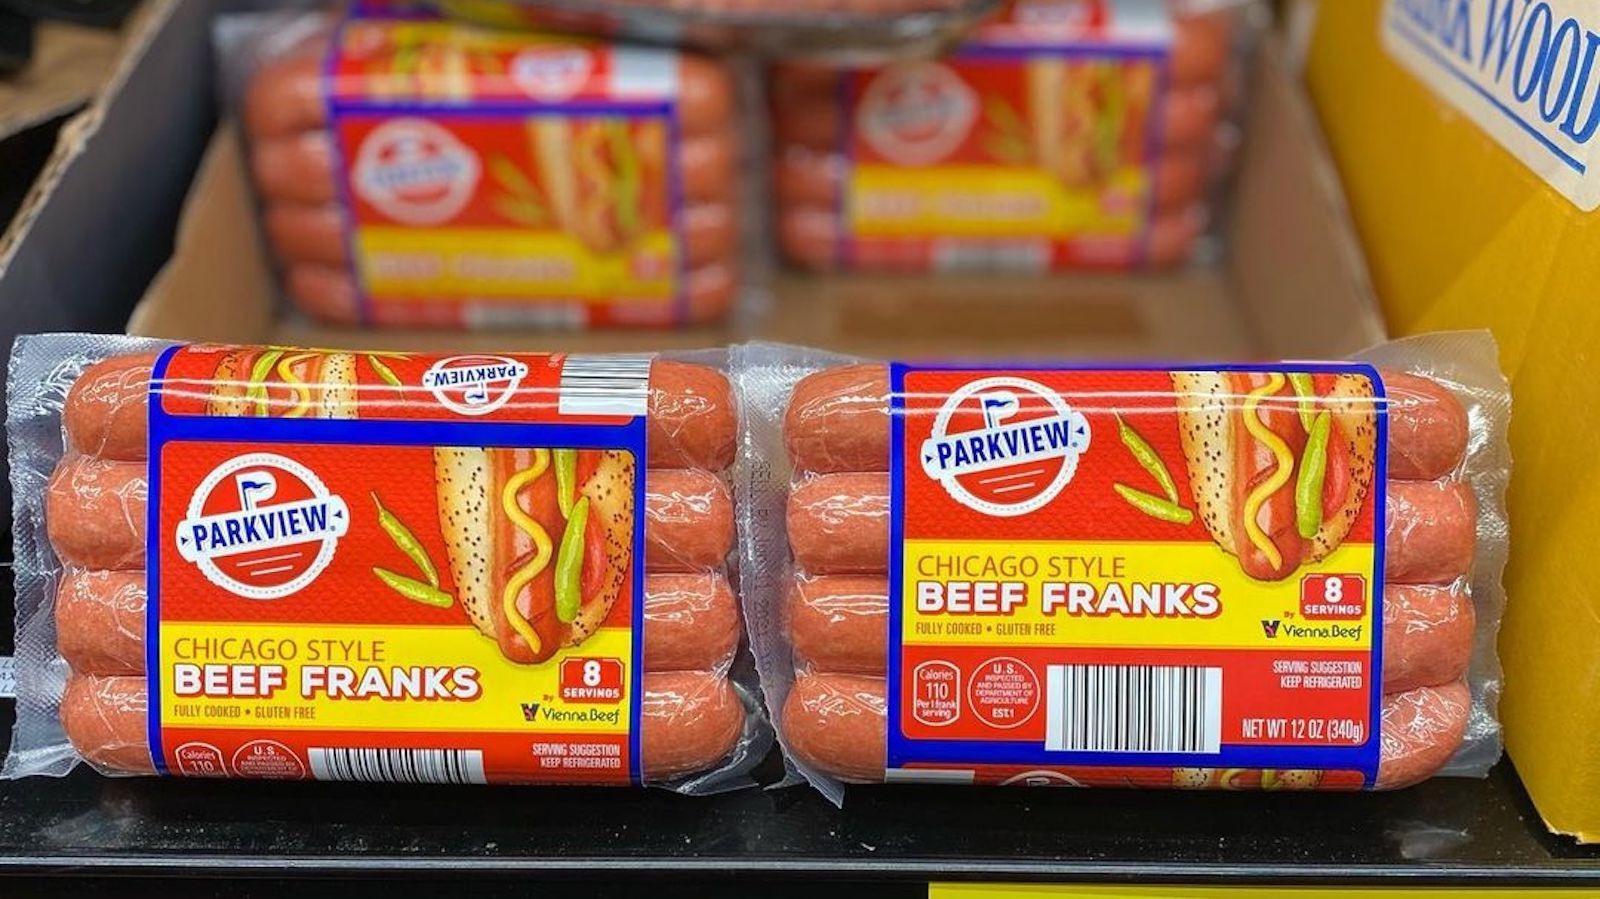 Aldi's Vienna Beef Hot Dogs Bring The Taste Of Chicago To Every Home